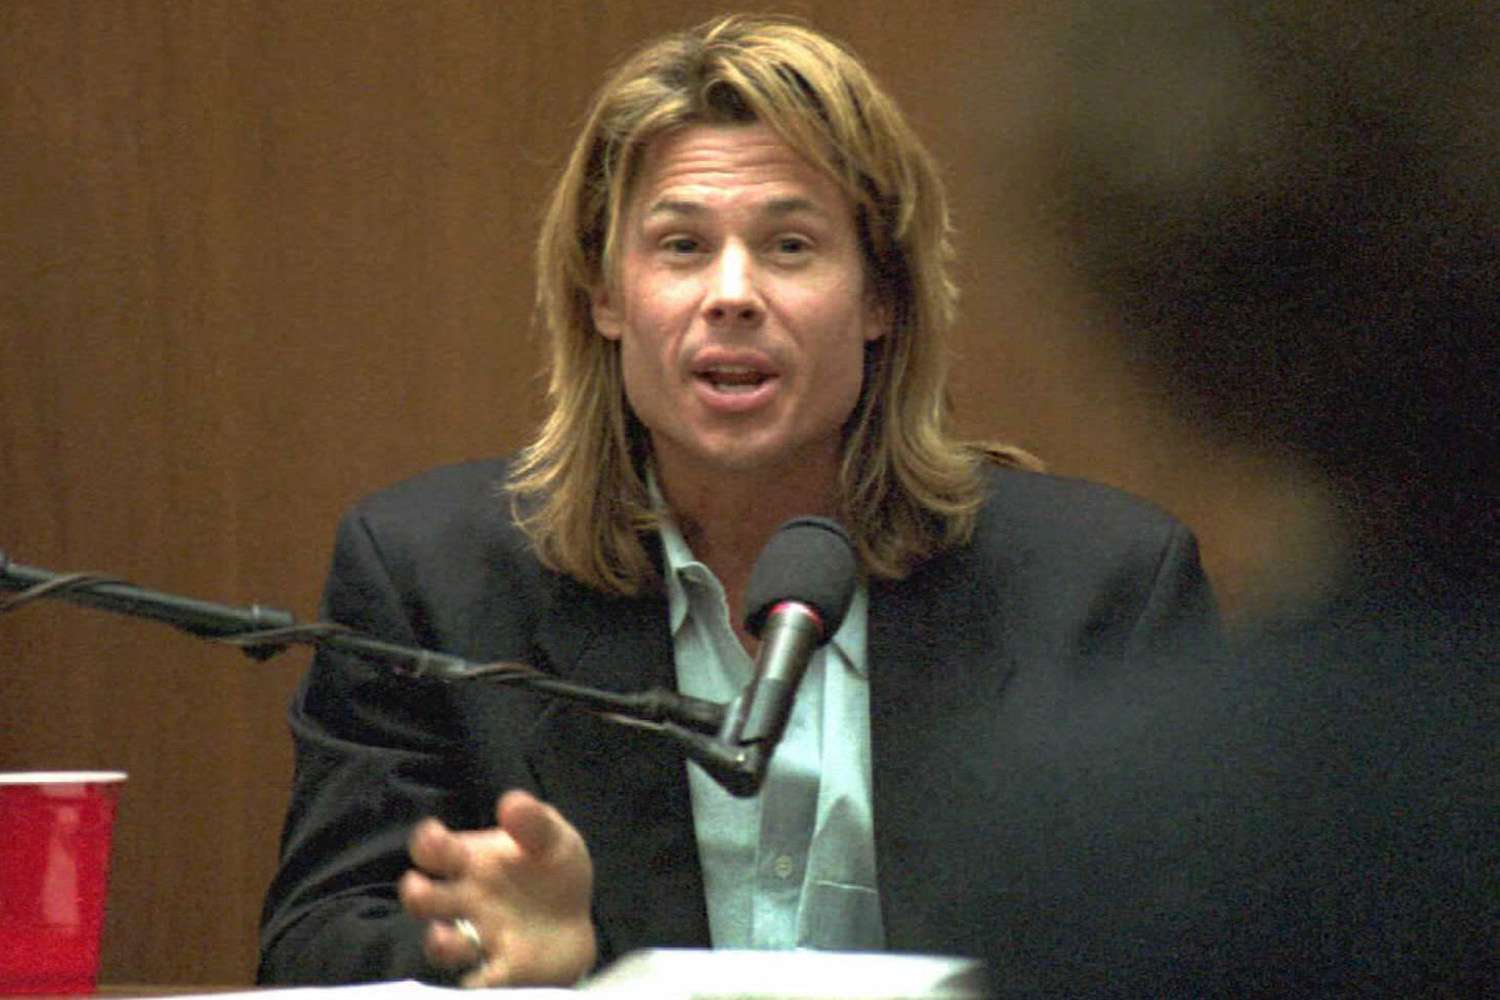 Brian "Kato" Kaelin responds to questions from prosecutor Marcia Clark 27 March, his fourth day on the witness stand in the O.J. Simpson murder trial. 